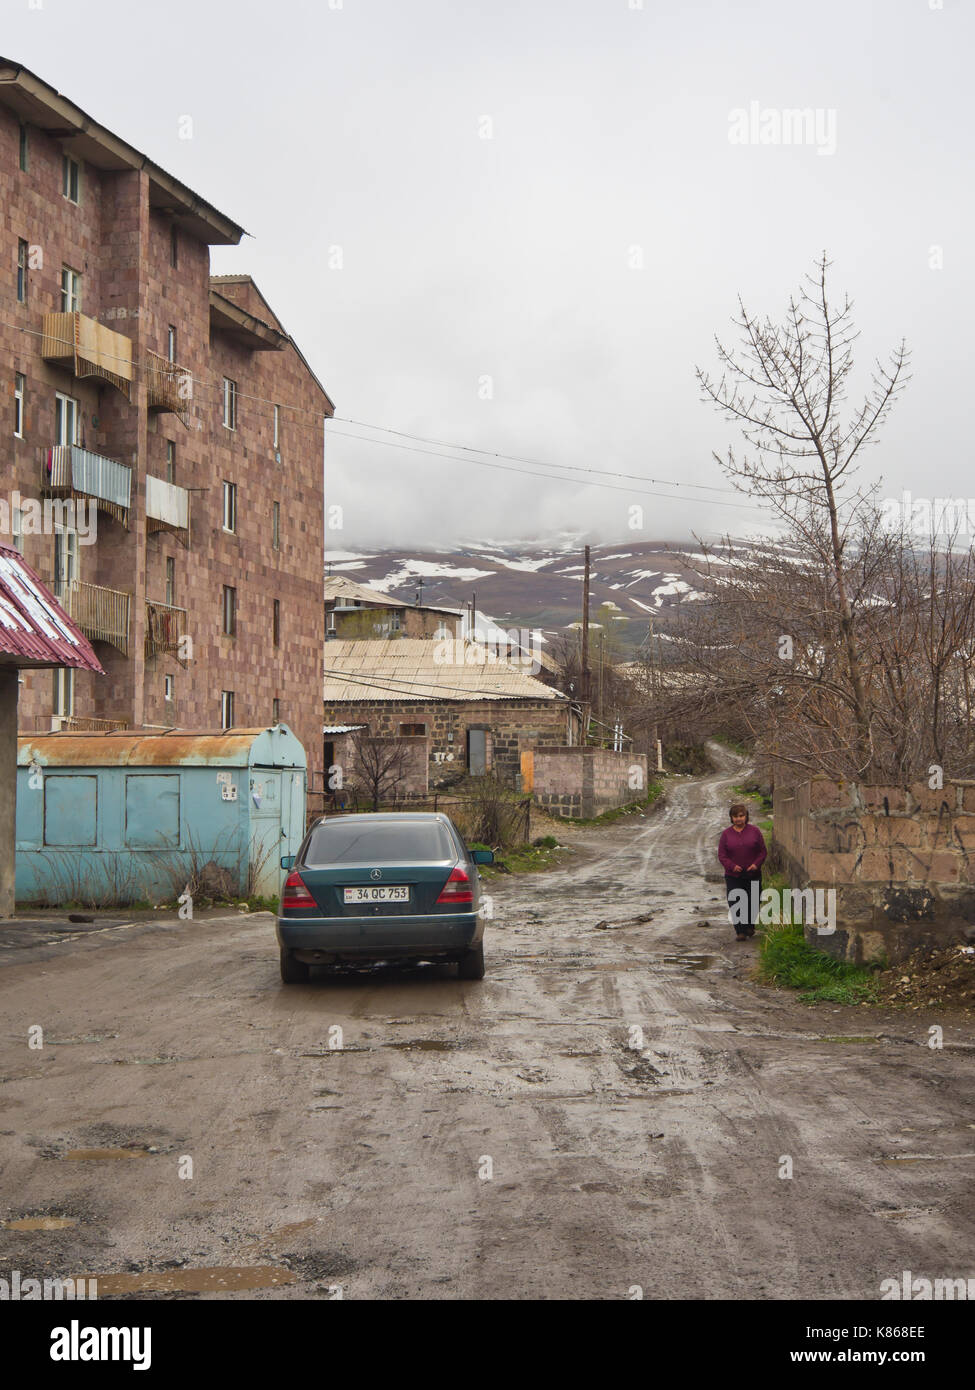 Aparan, a small town in Armenia along the M3 highway, dirt road with rainy potholes, apartment block and view towards the slopes of mount Aragats Stock Photo